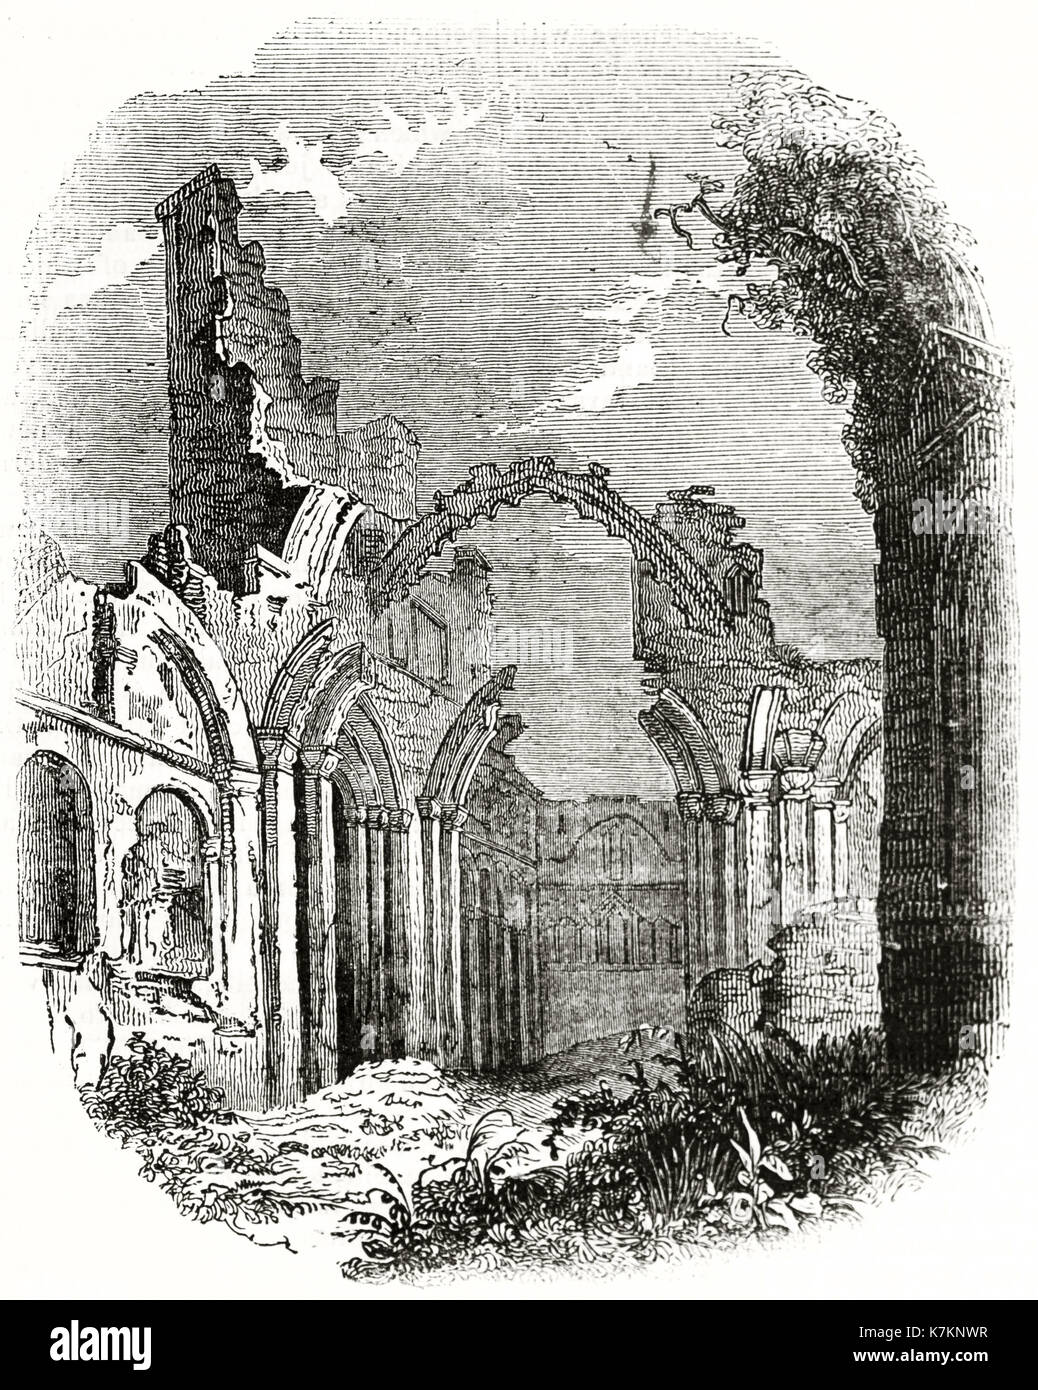 Old view of Lindisfarne priory ruins, United Kingdom. By unidentified author, publ. on The Penny Magazine, London, 1837 Stock Photo